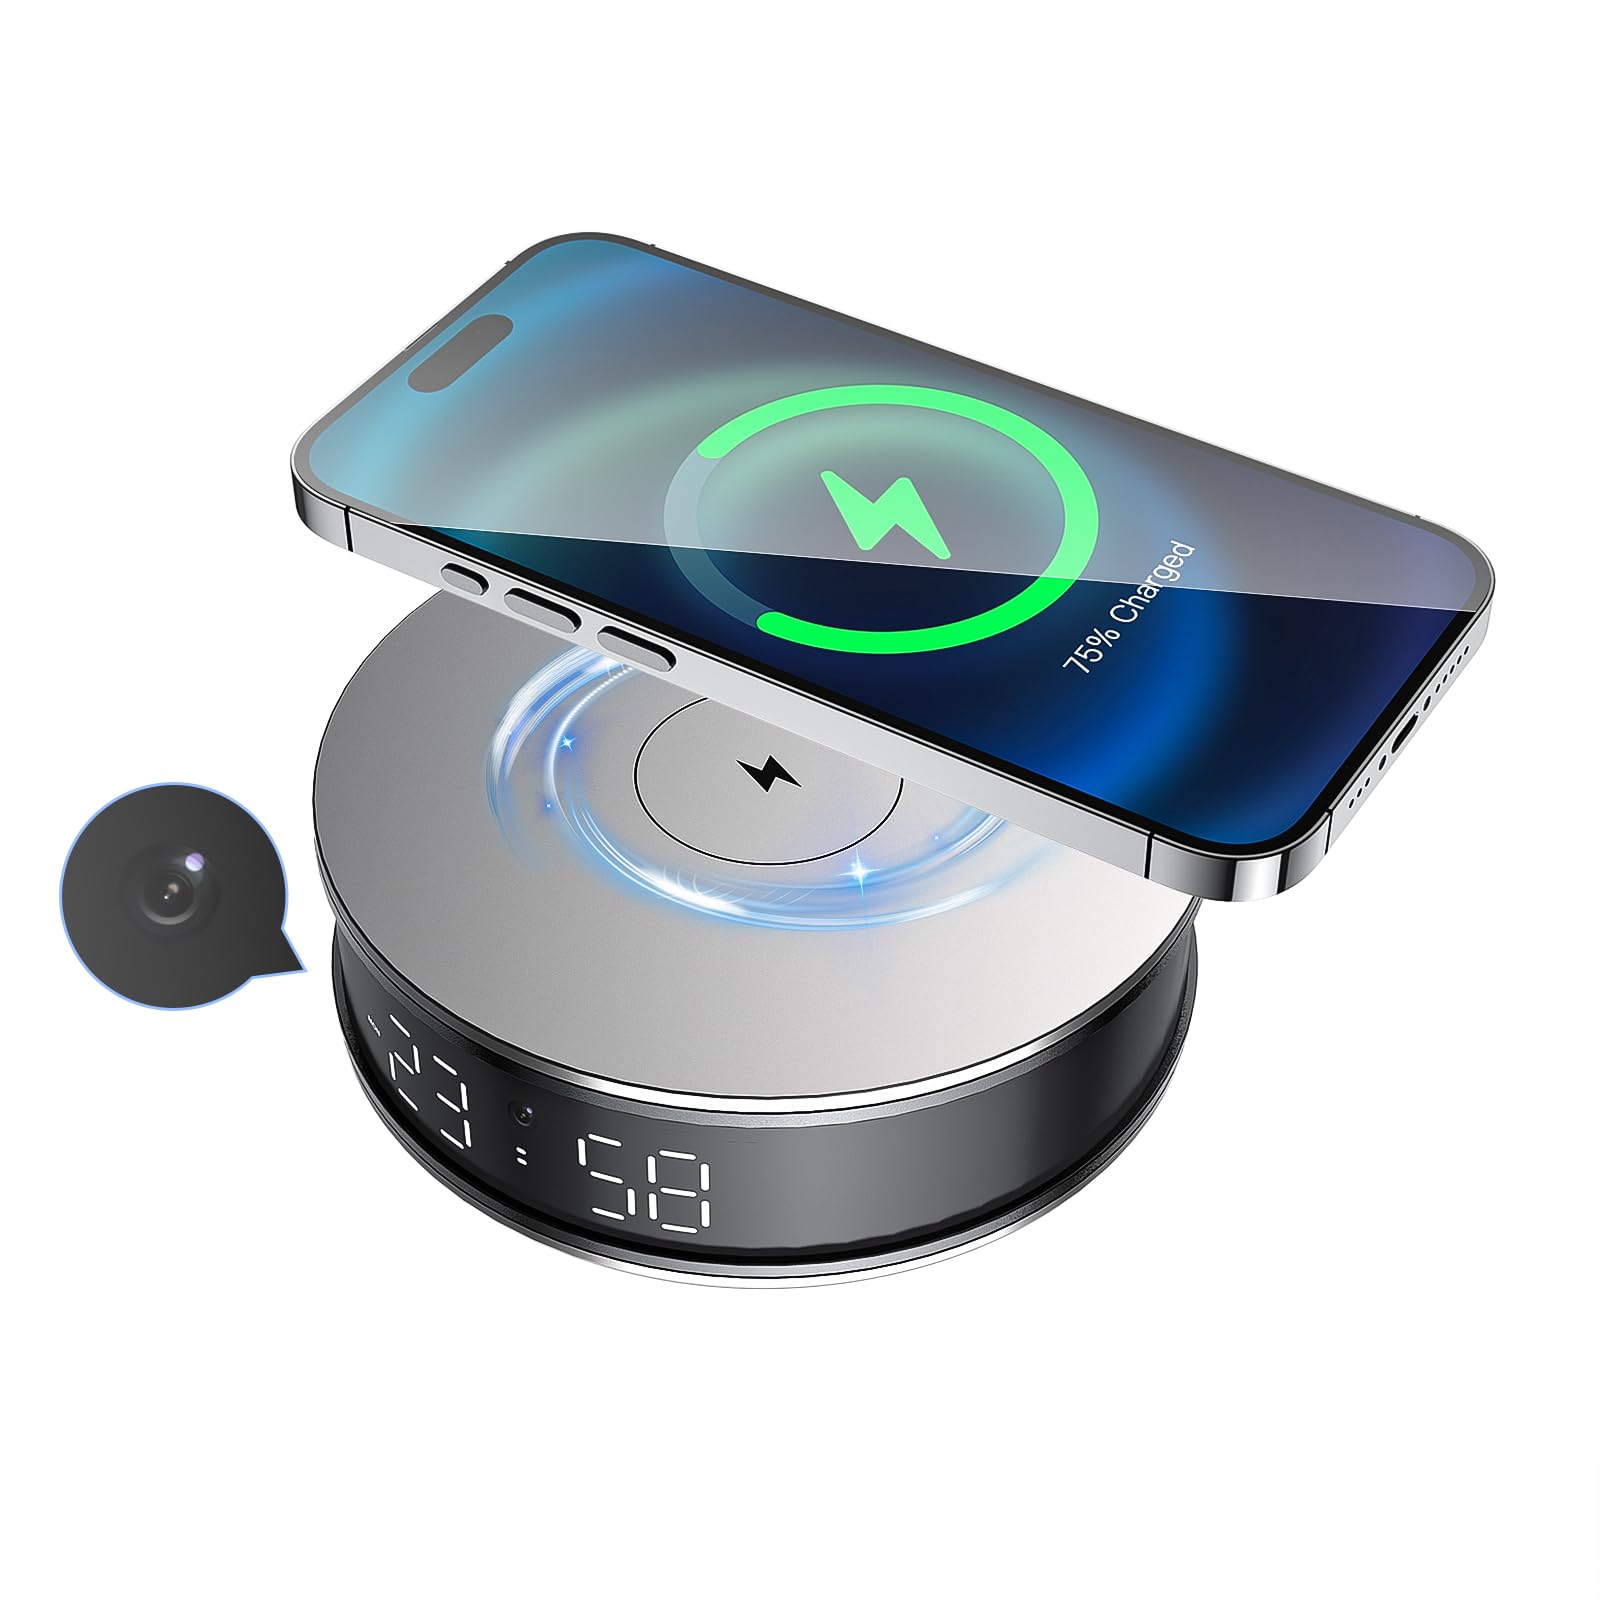 LIZVIE Charger with 15W Fast Wireless Charging Smart Camera APP